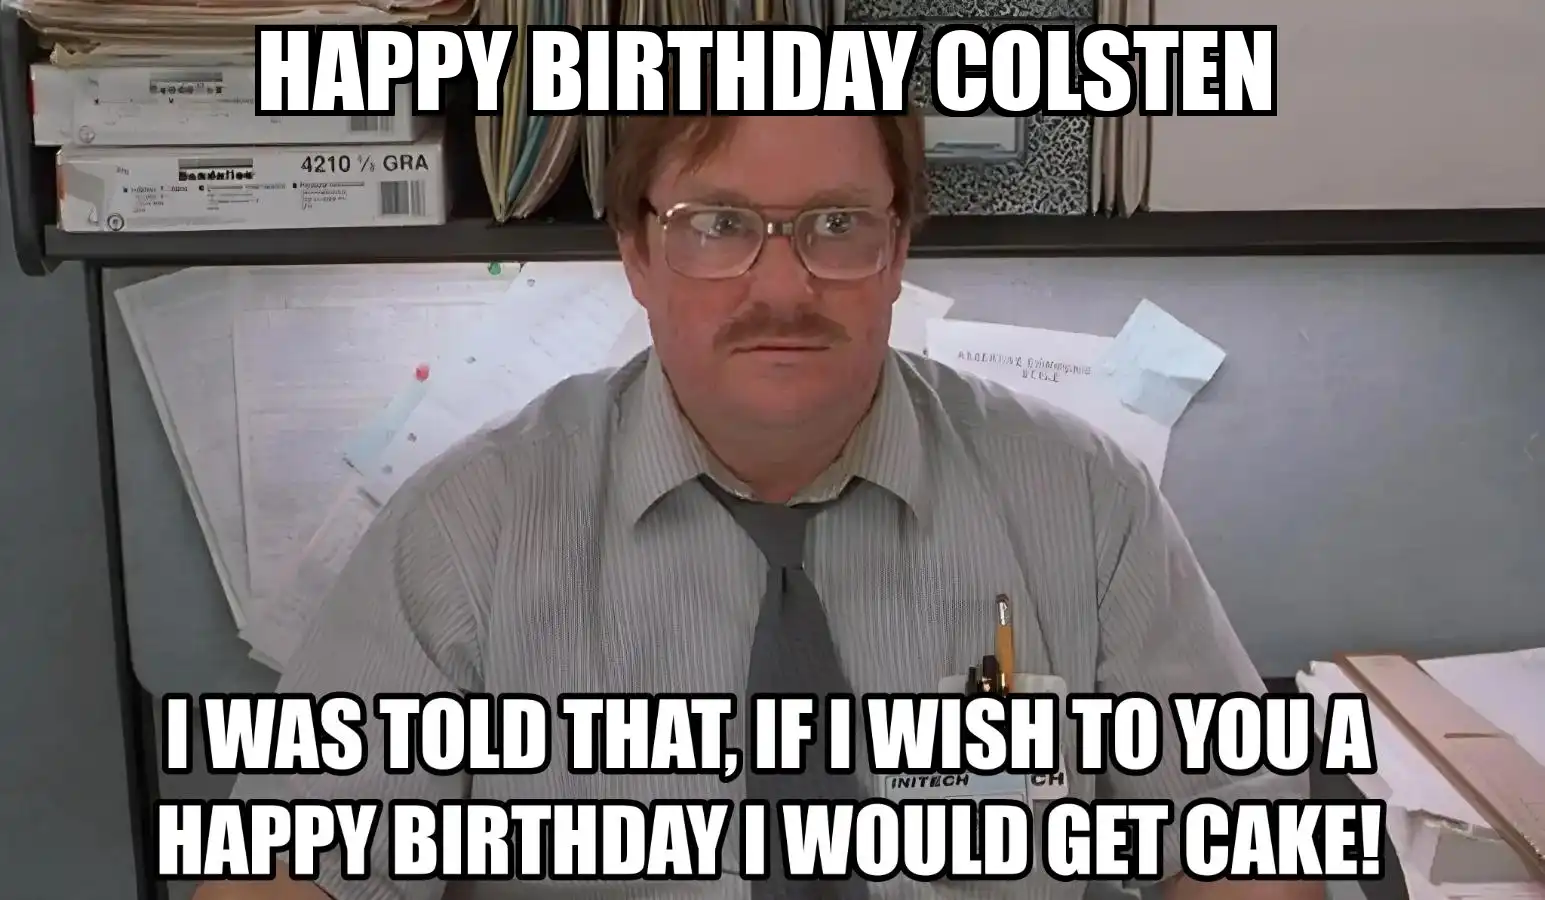 Happy Birthday Colsten I Would Get A Cake Meme